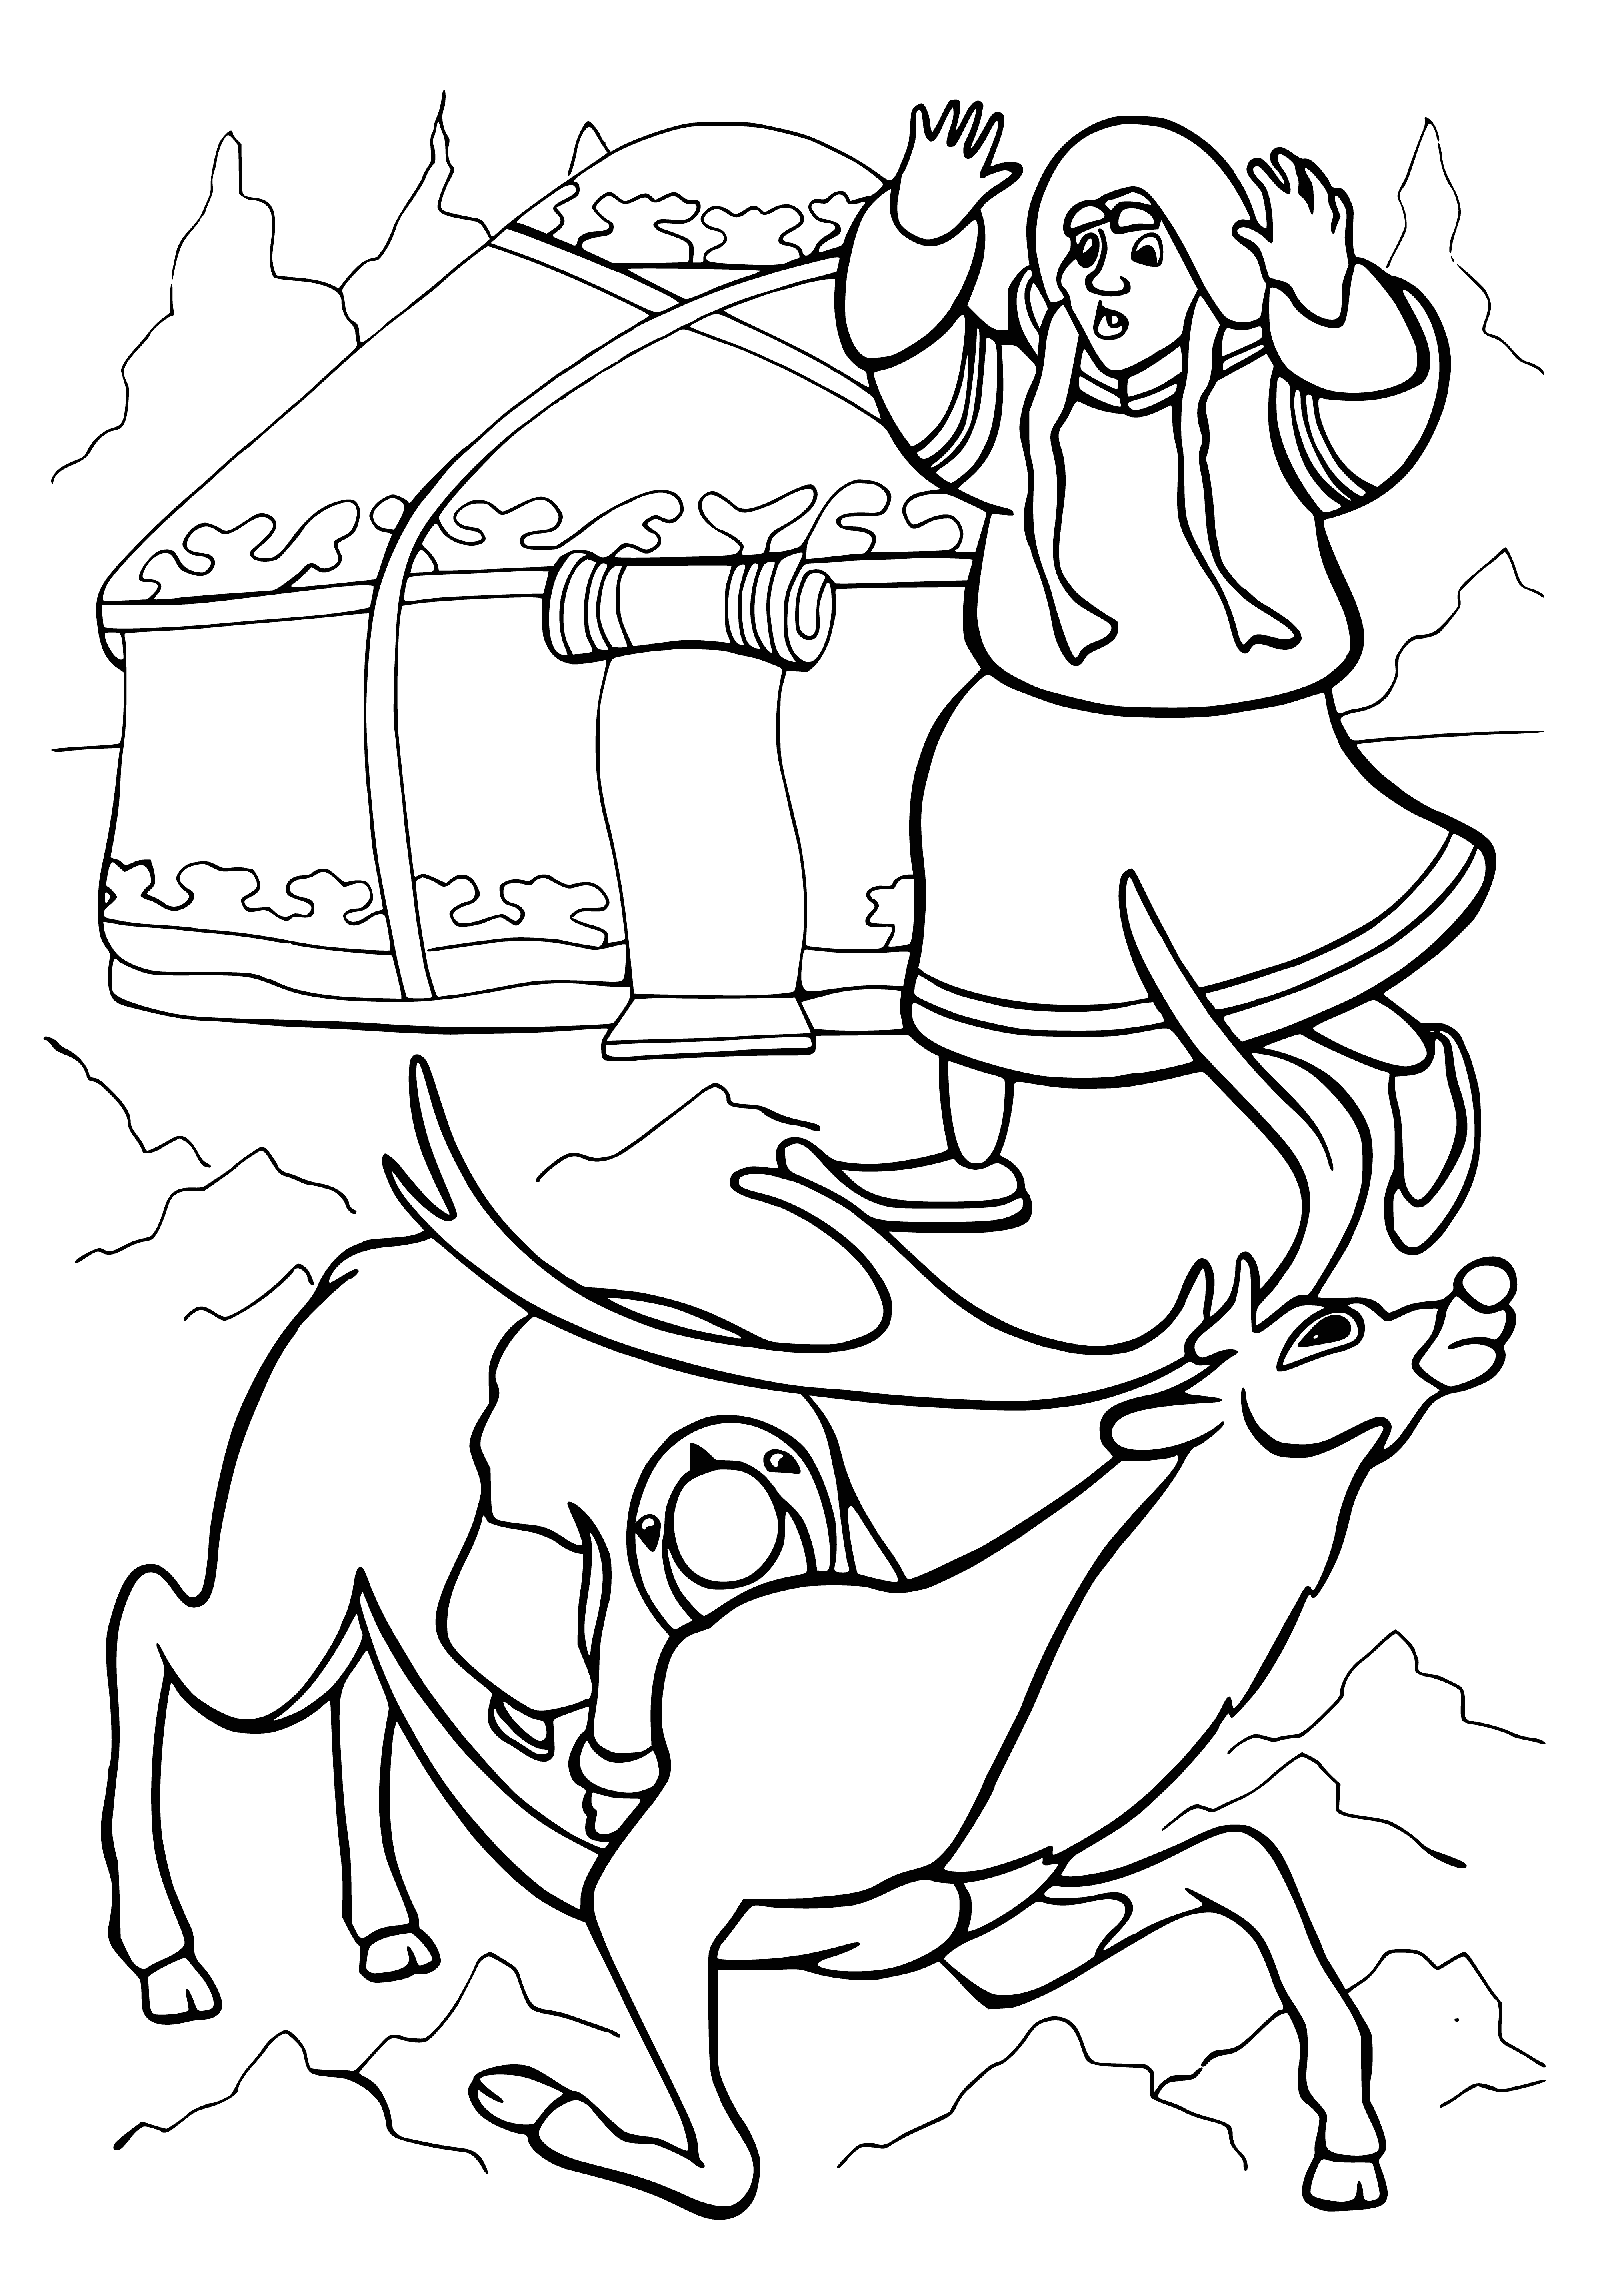 coloring page: Finca is a majestic white horse with grace and poise who looks like she could jump tall buildings.